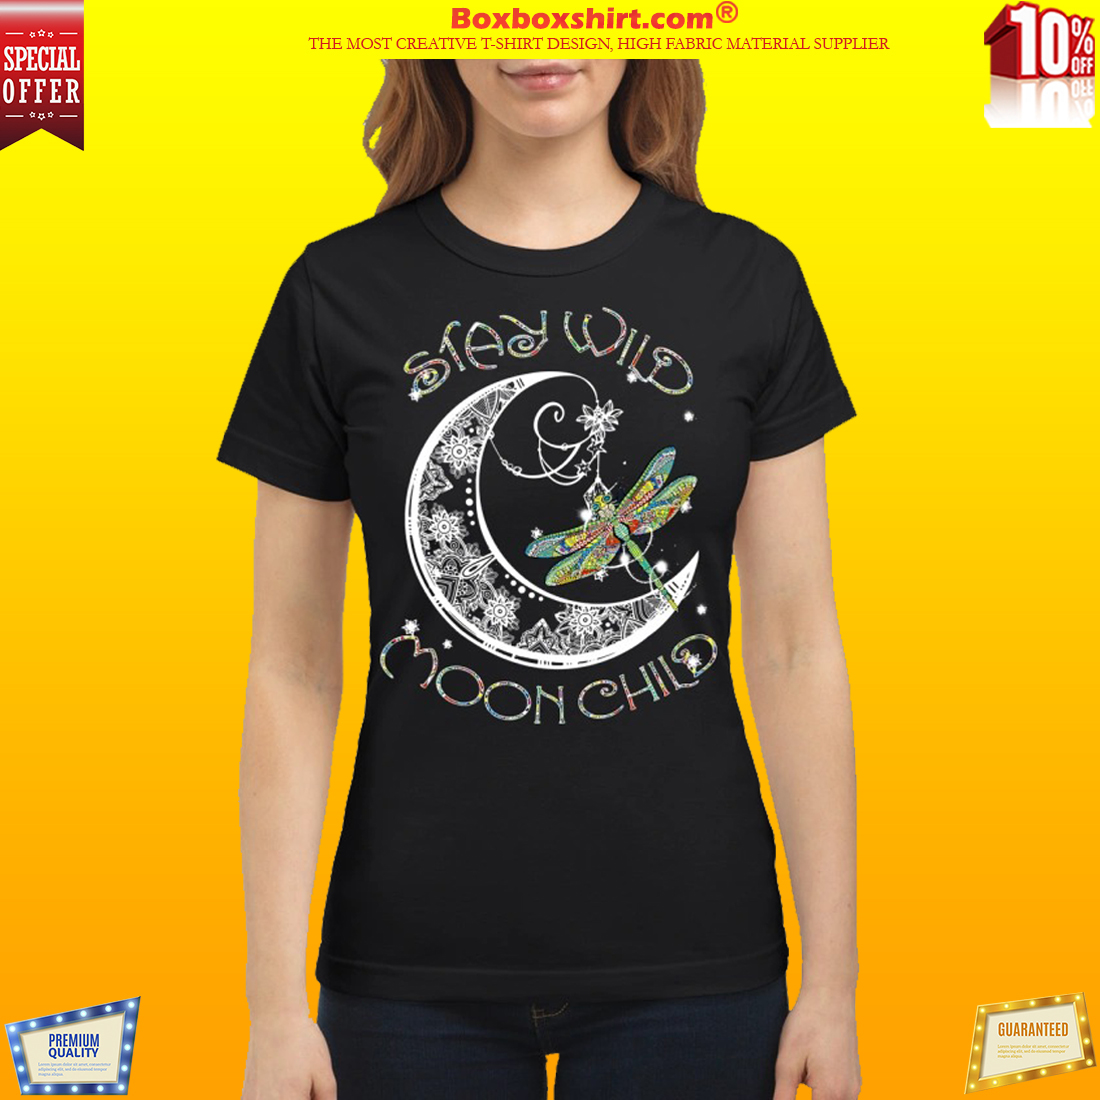 Dragonfly Stay Wild Moon Child shirt